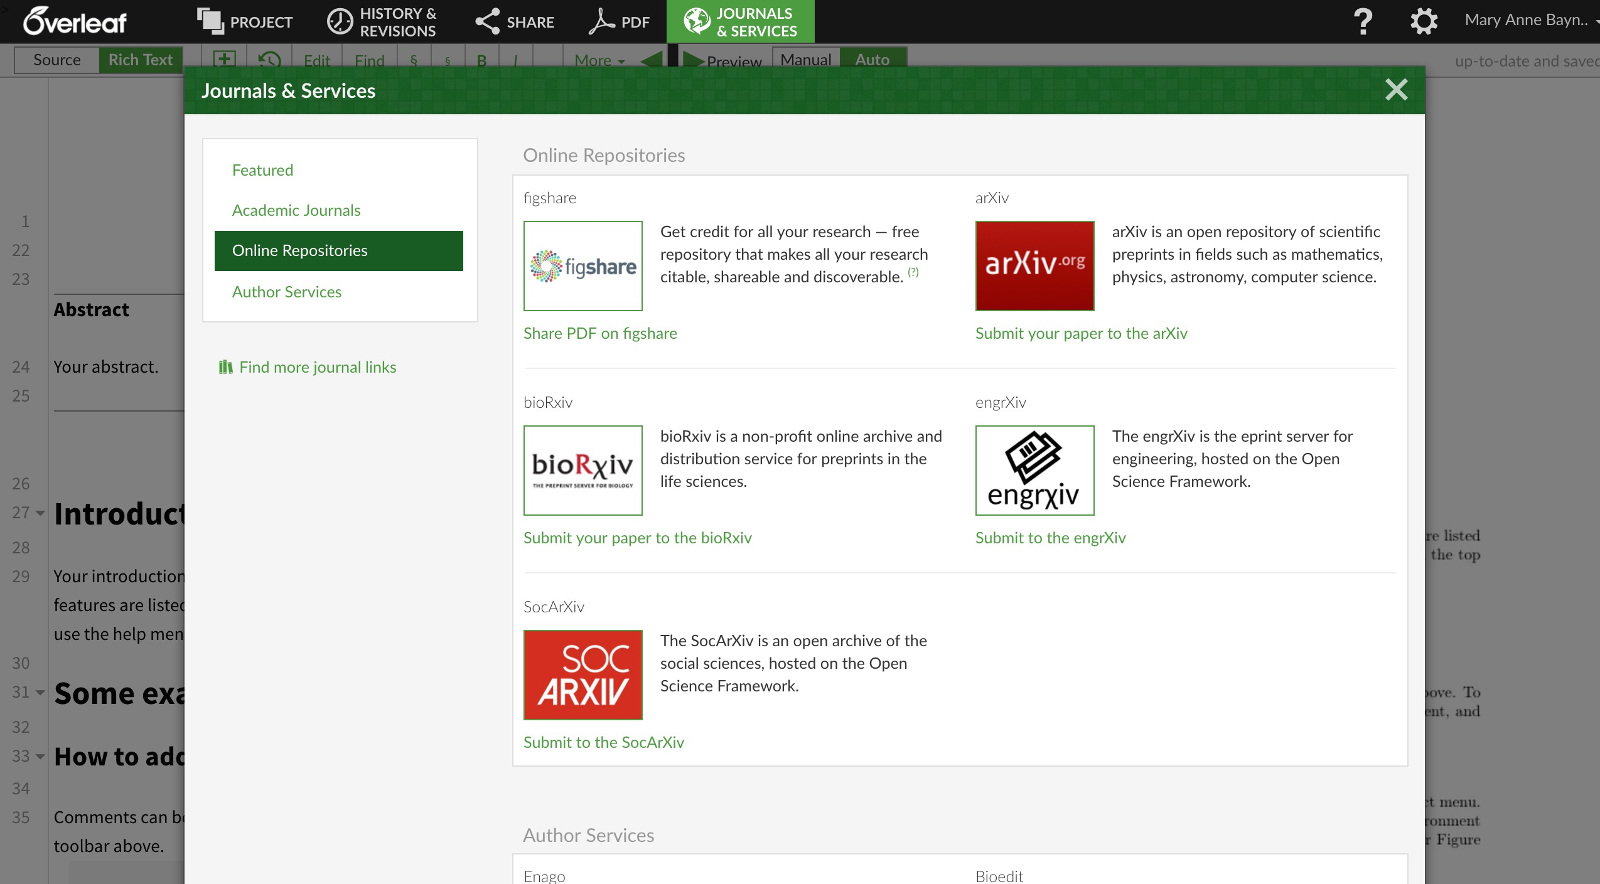 Journals and Services menu in Overleaf